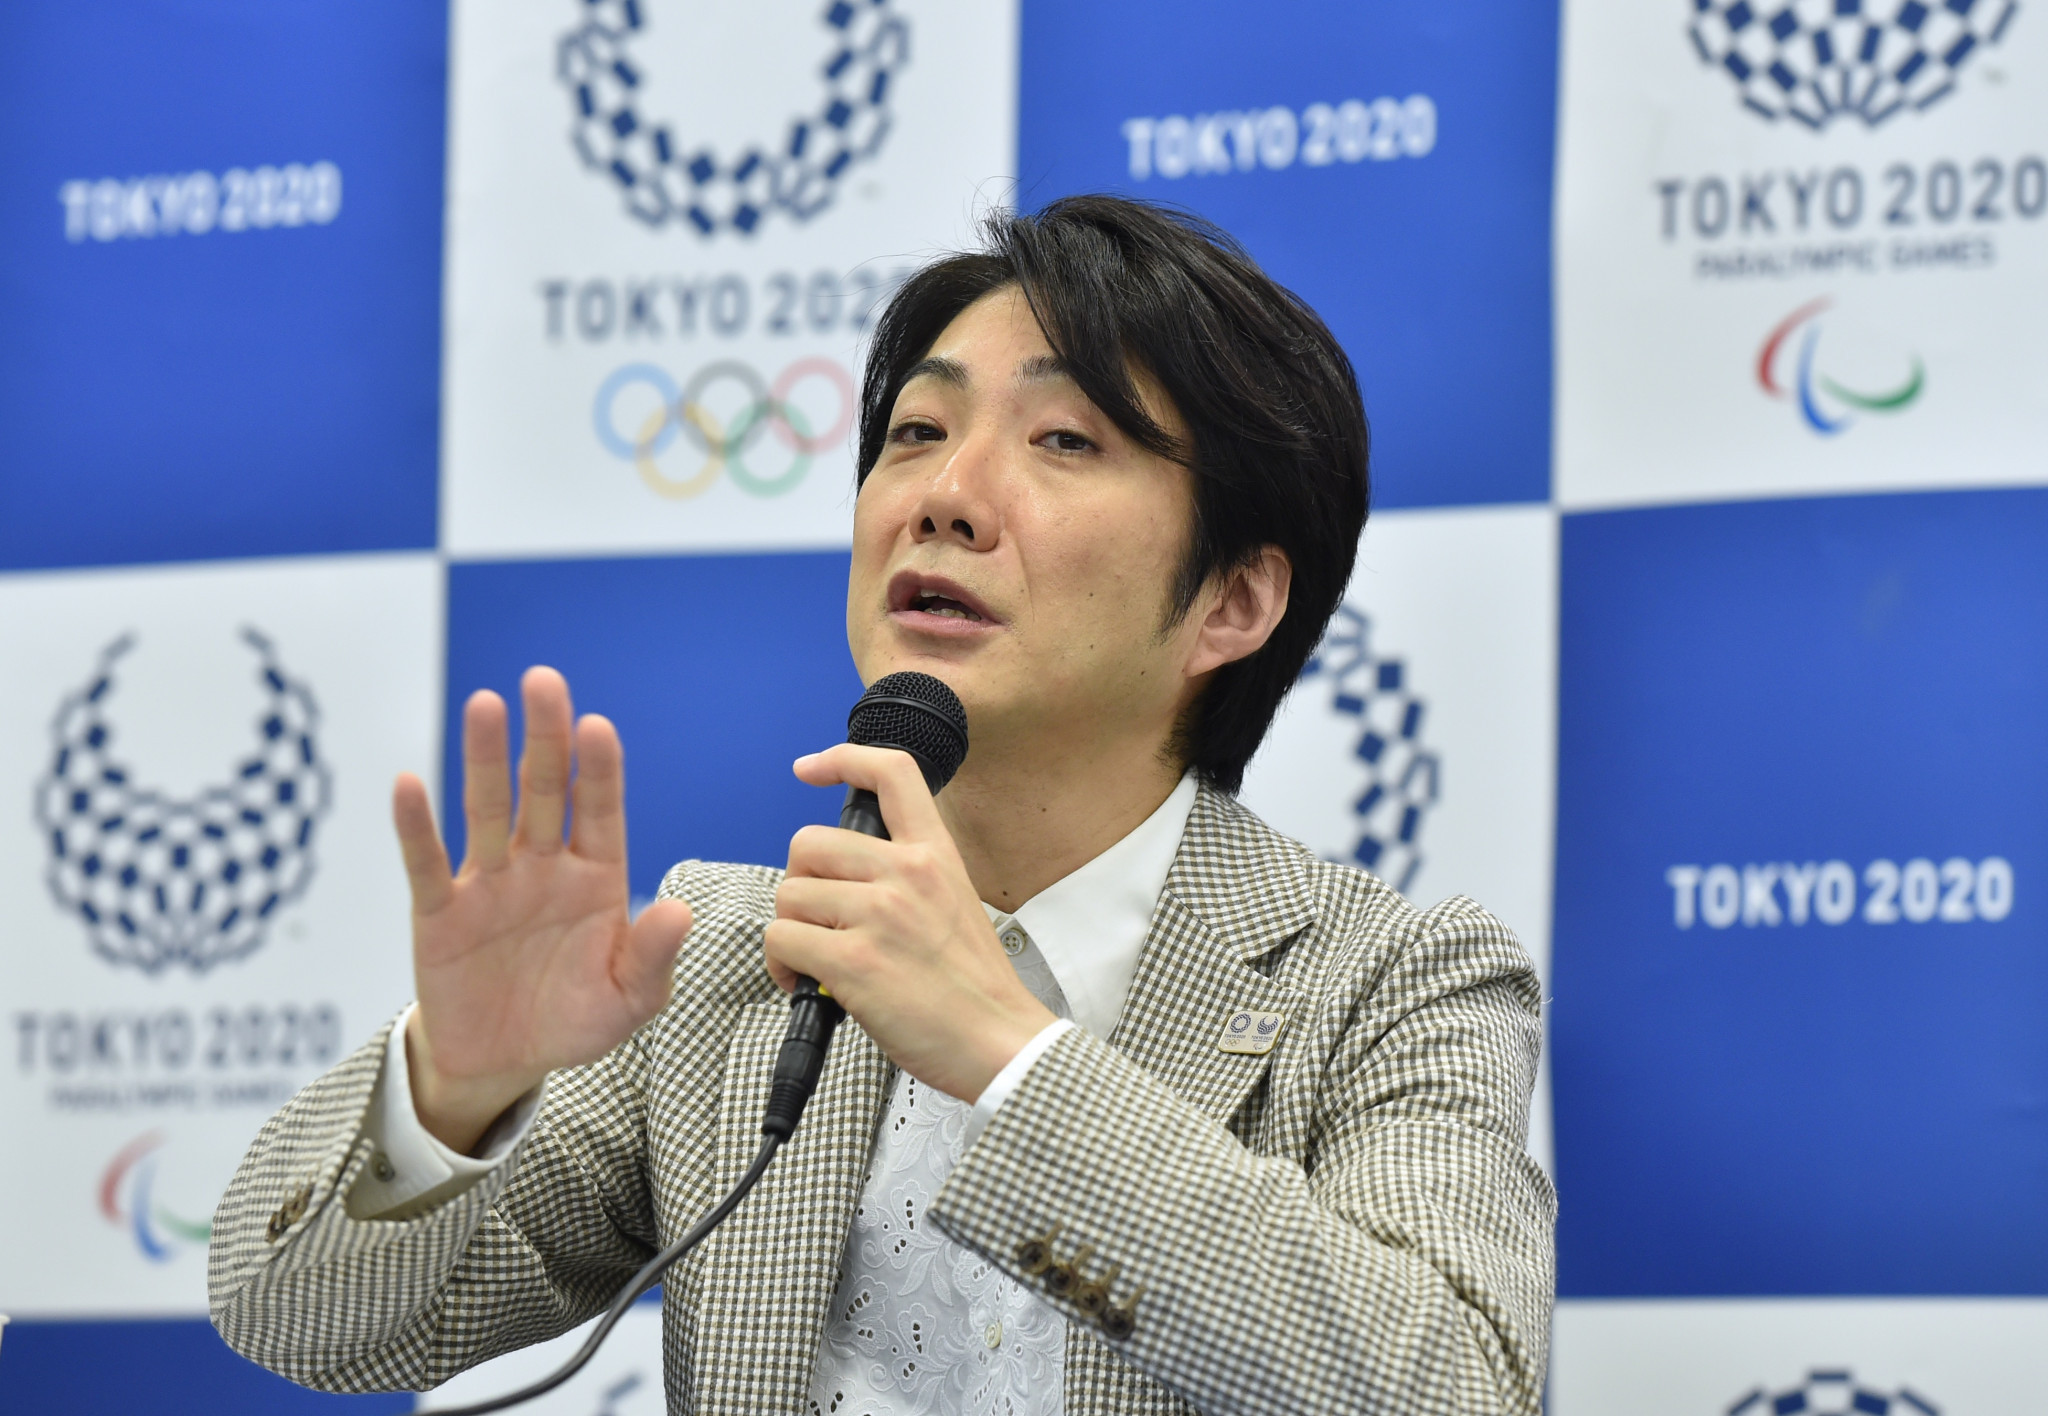 Former chief executive creative director Nomura Mansai will now be an advisor for Tokyo 2020 ©Getty Images